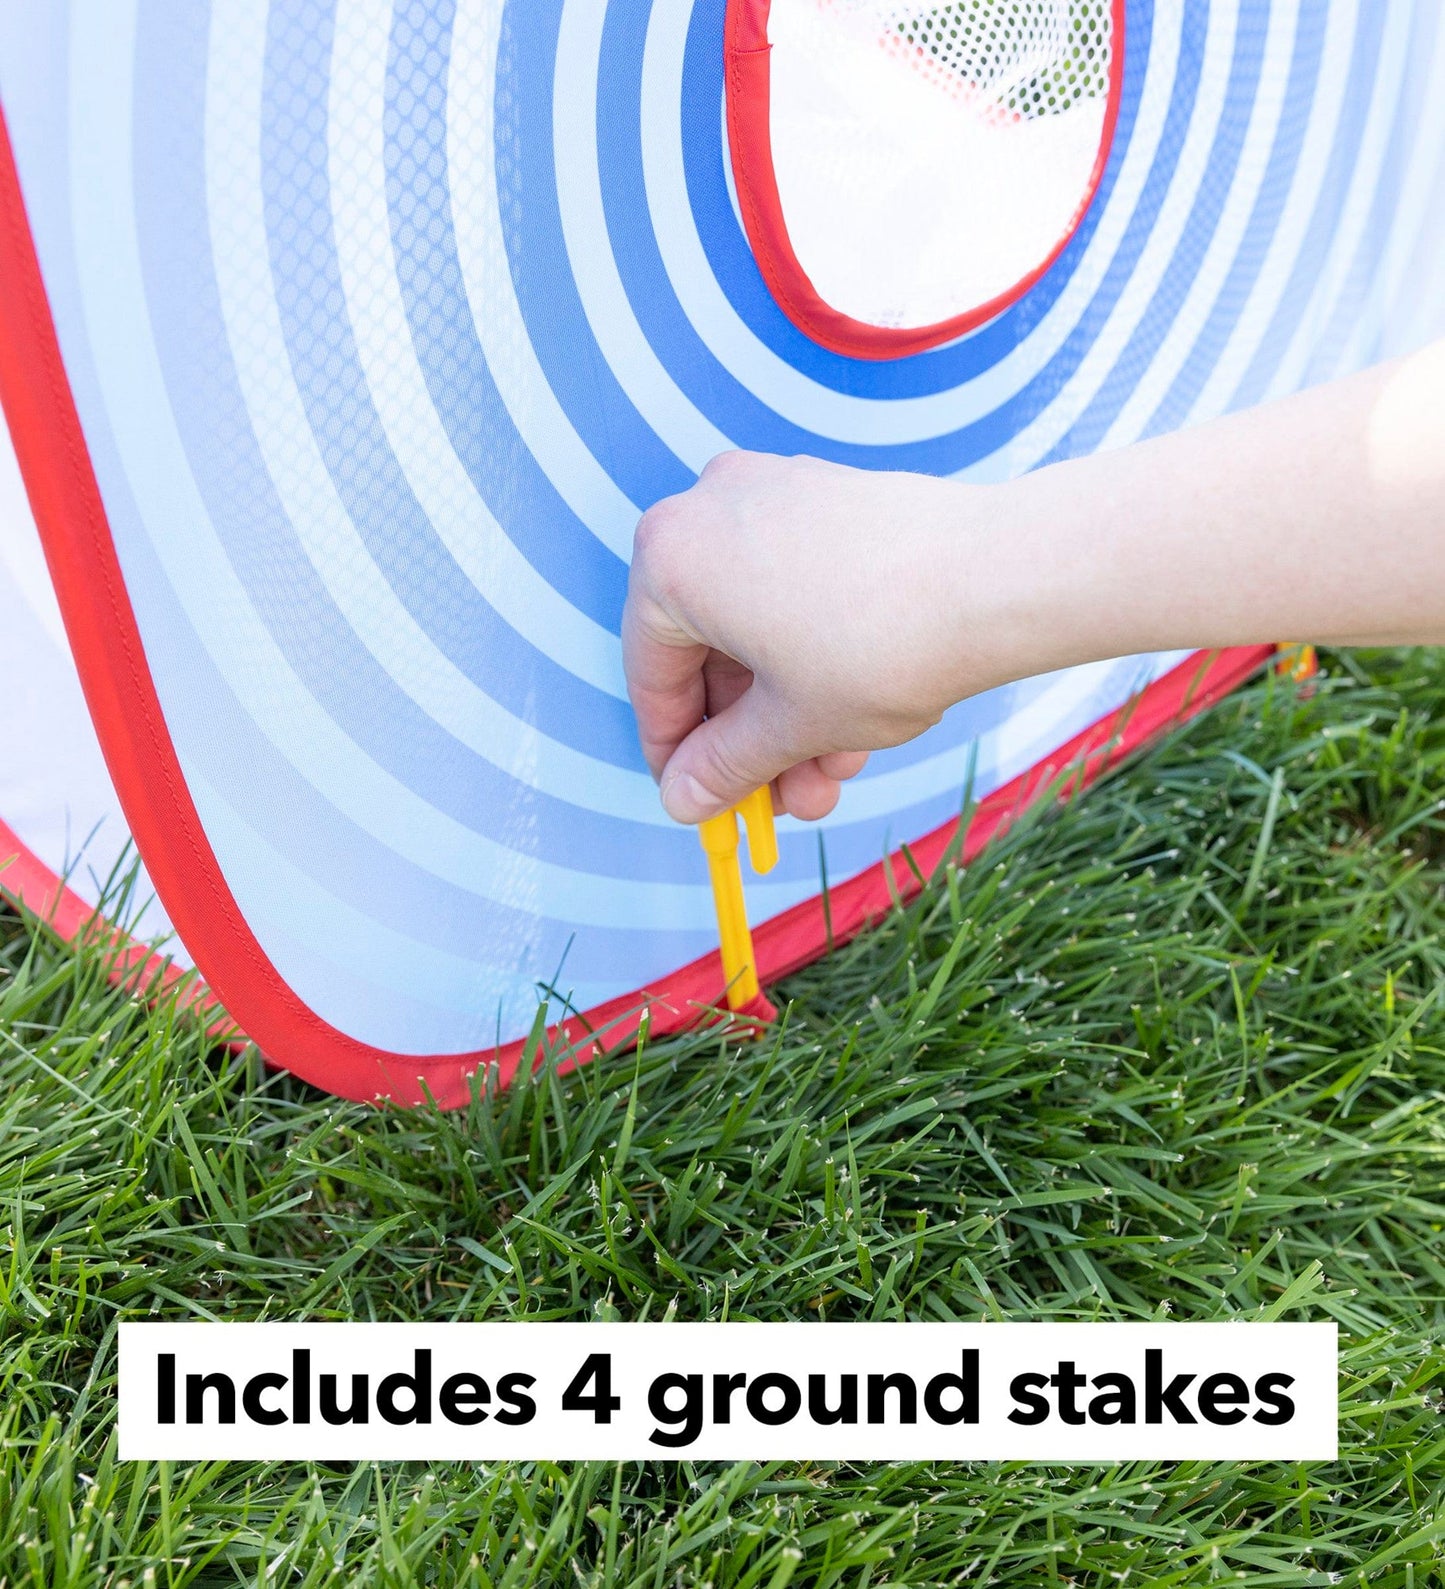 3-in-1 Portable Pop-Up Target Game Set with Bean Bags